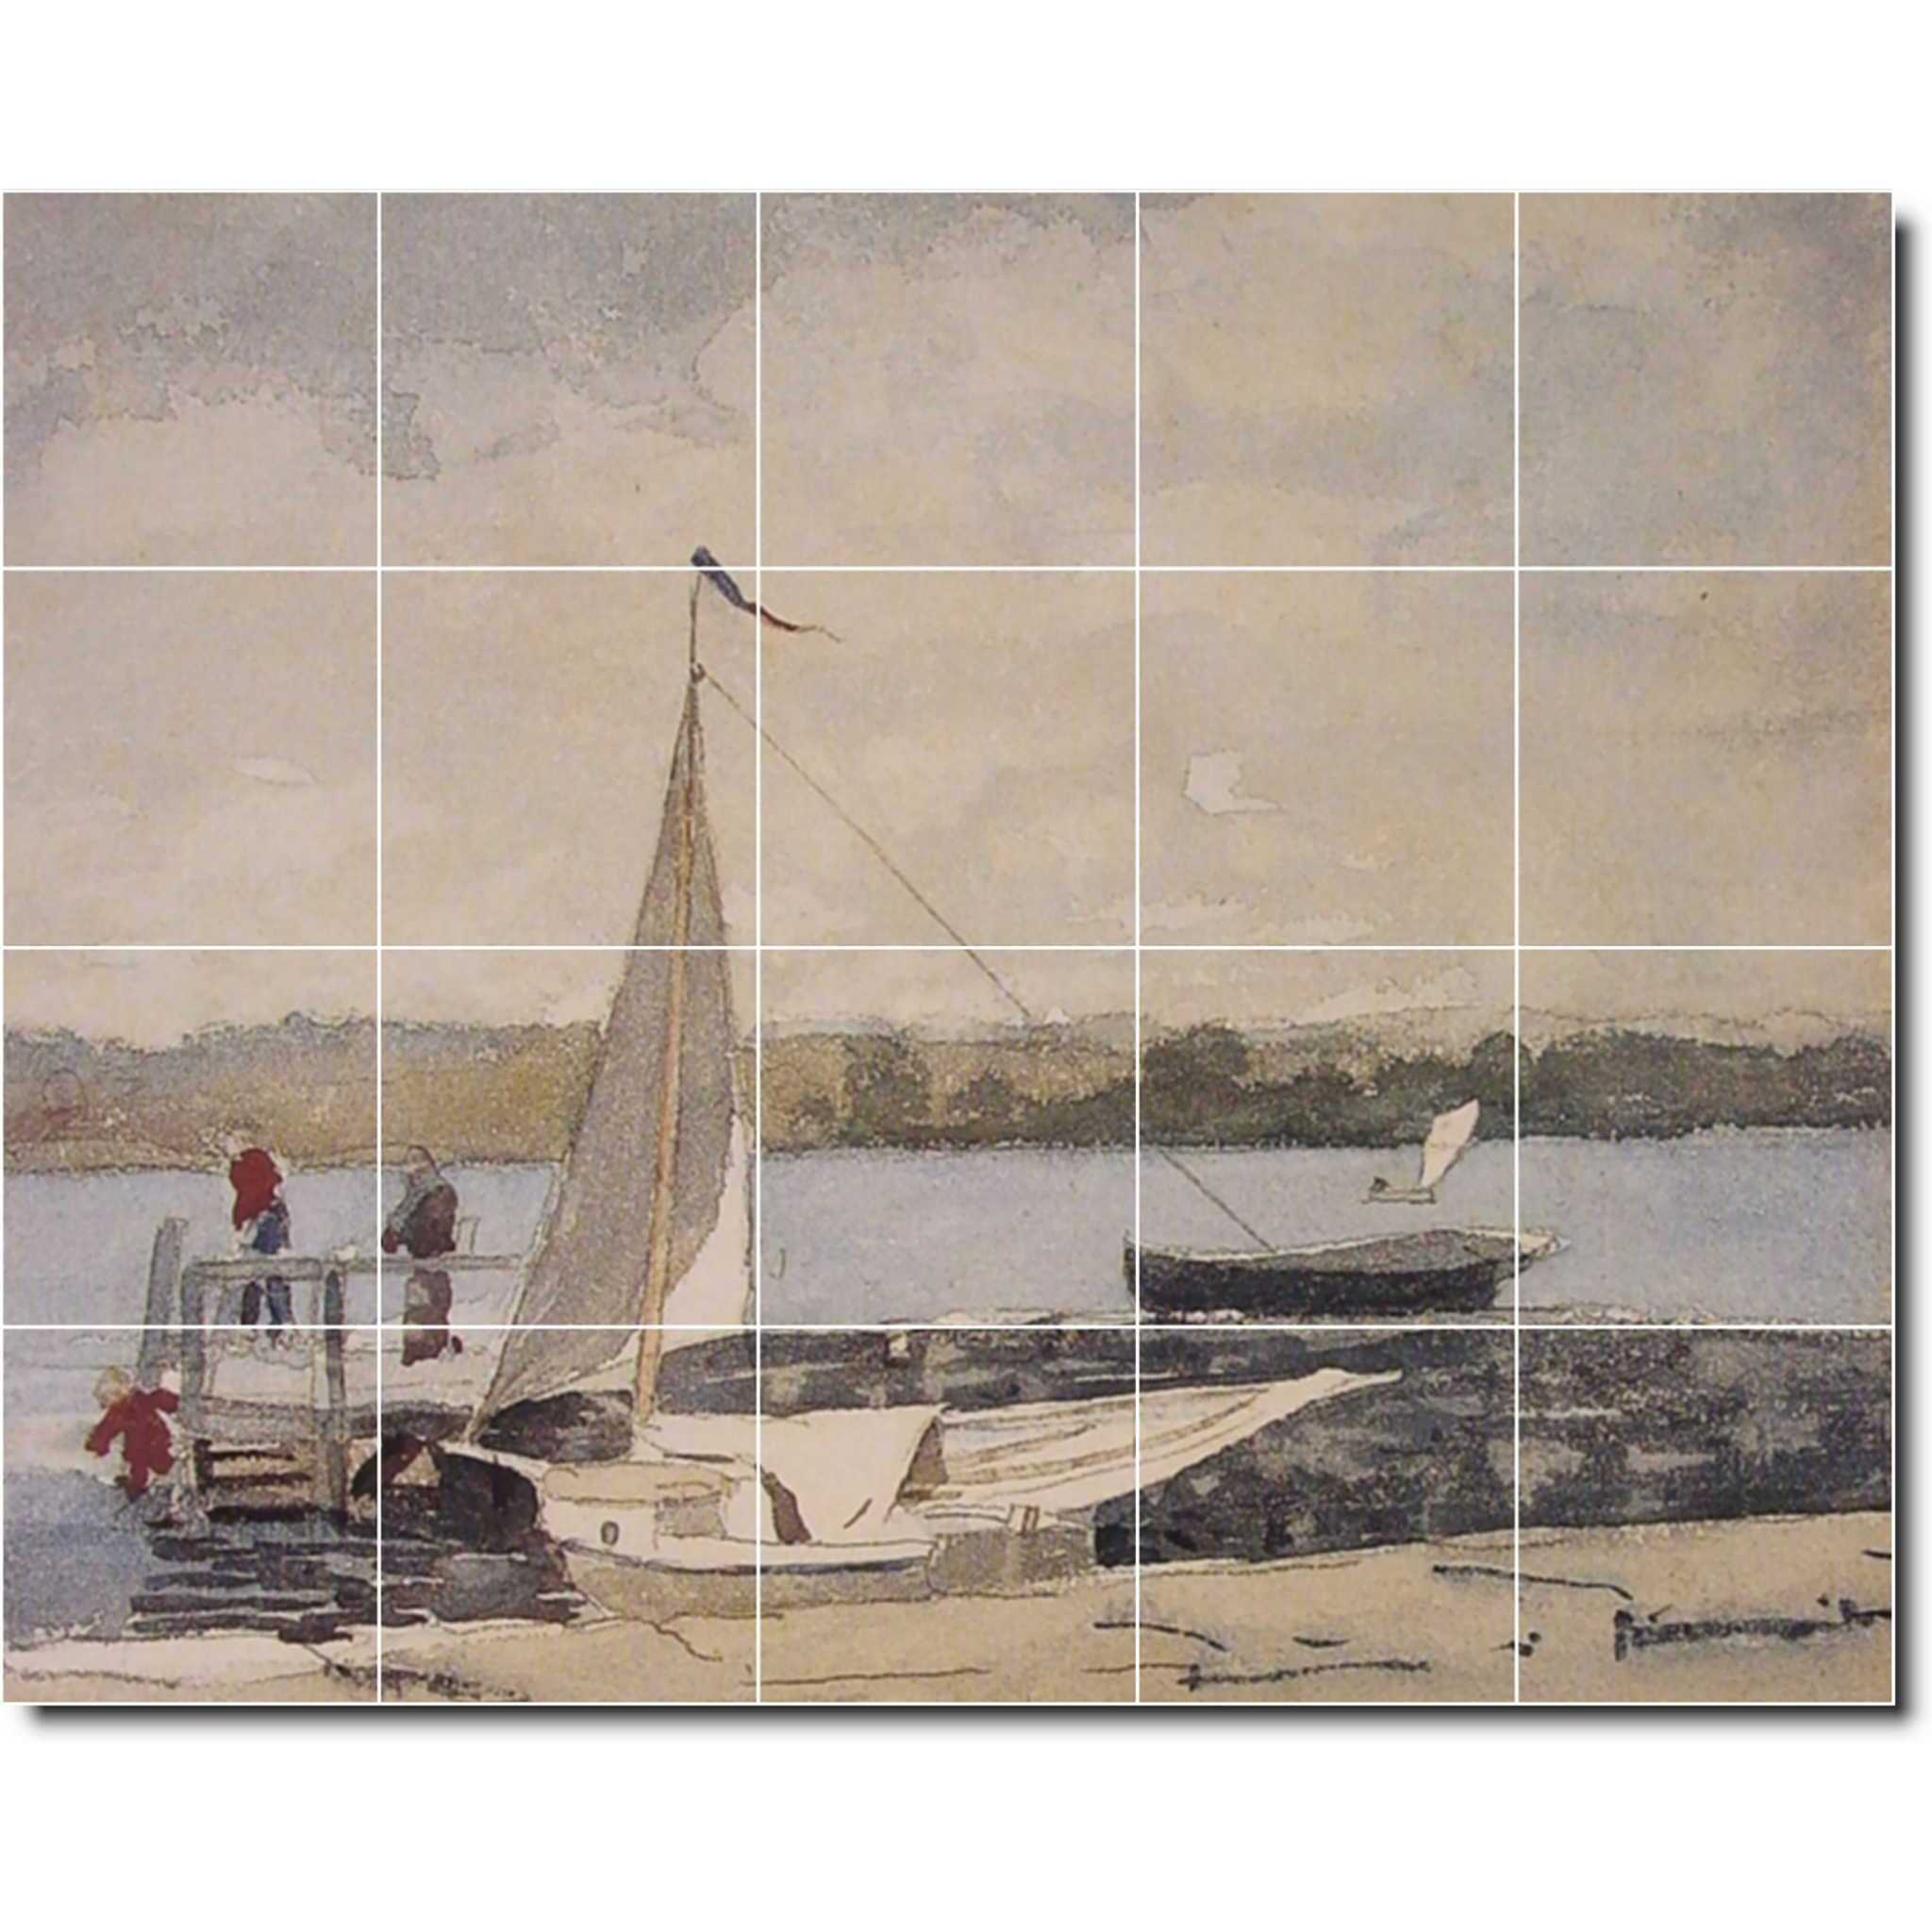 Winslow Homer Waterfront Painting Ceramic Tile Mural P04323-XL. 60"W x 48"H (20) 12x12 tiles